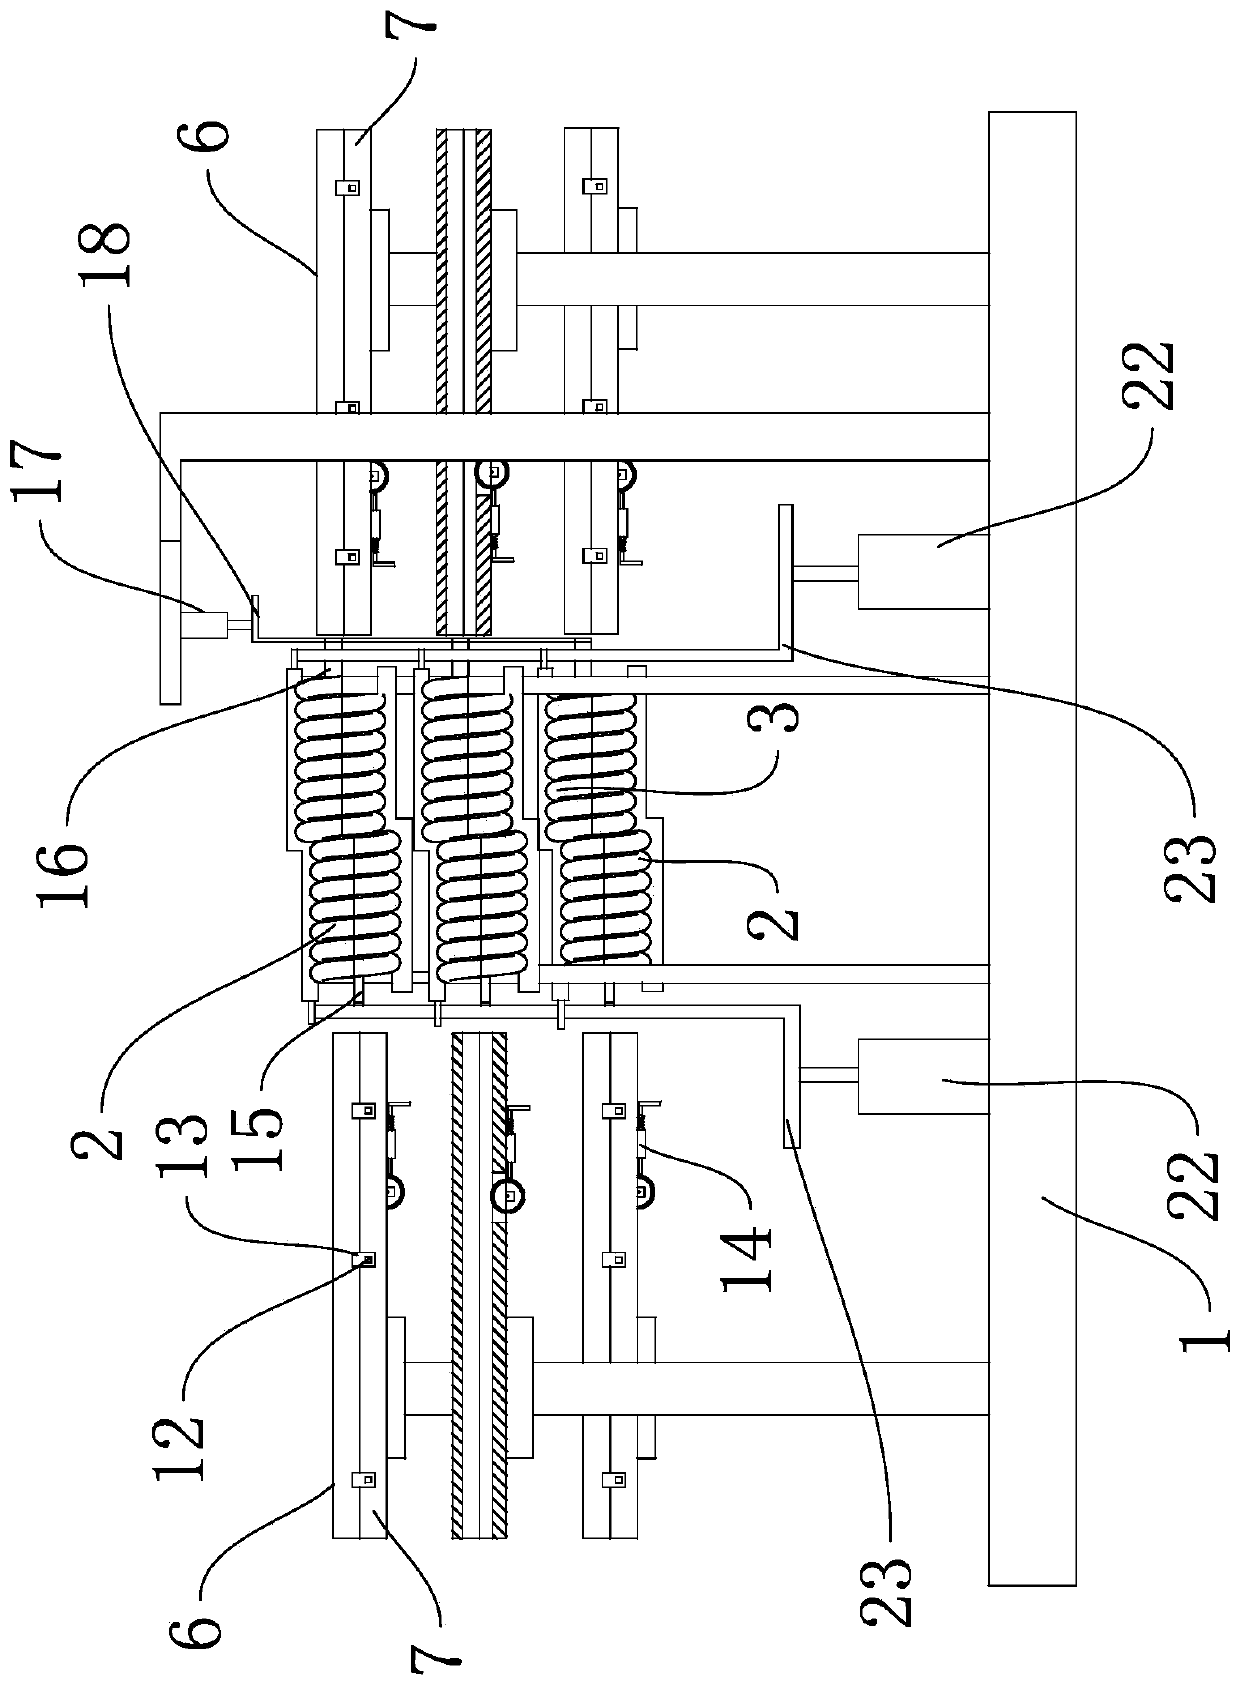 Fusion connection device of multi-core cable